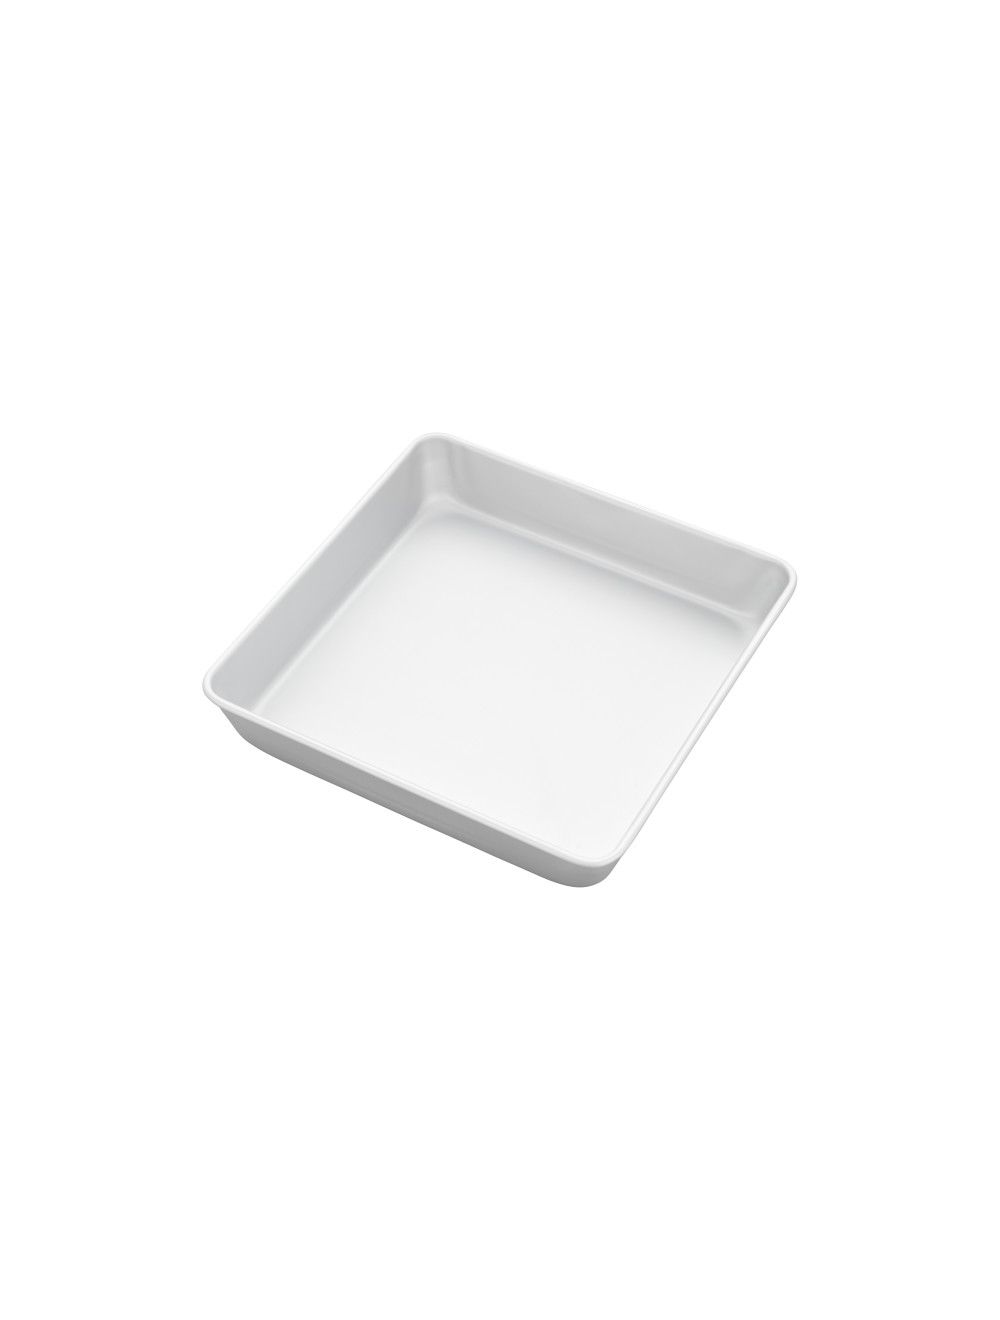 Wilton Performance Pans Aluminum Square Cake and Brownie Pan, 10-Inch